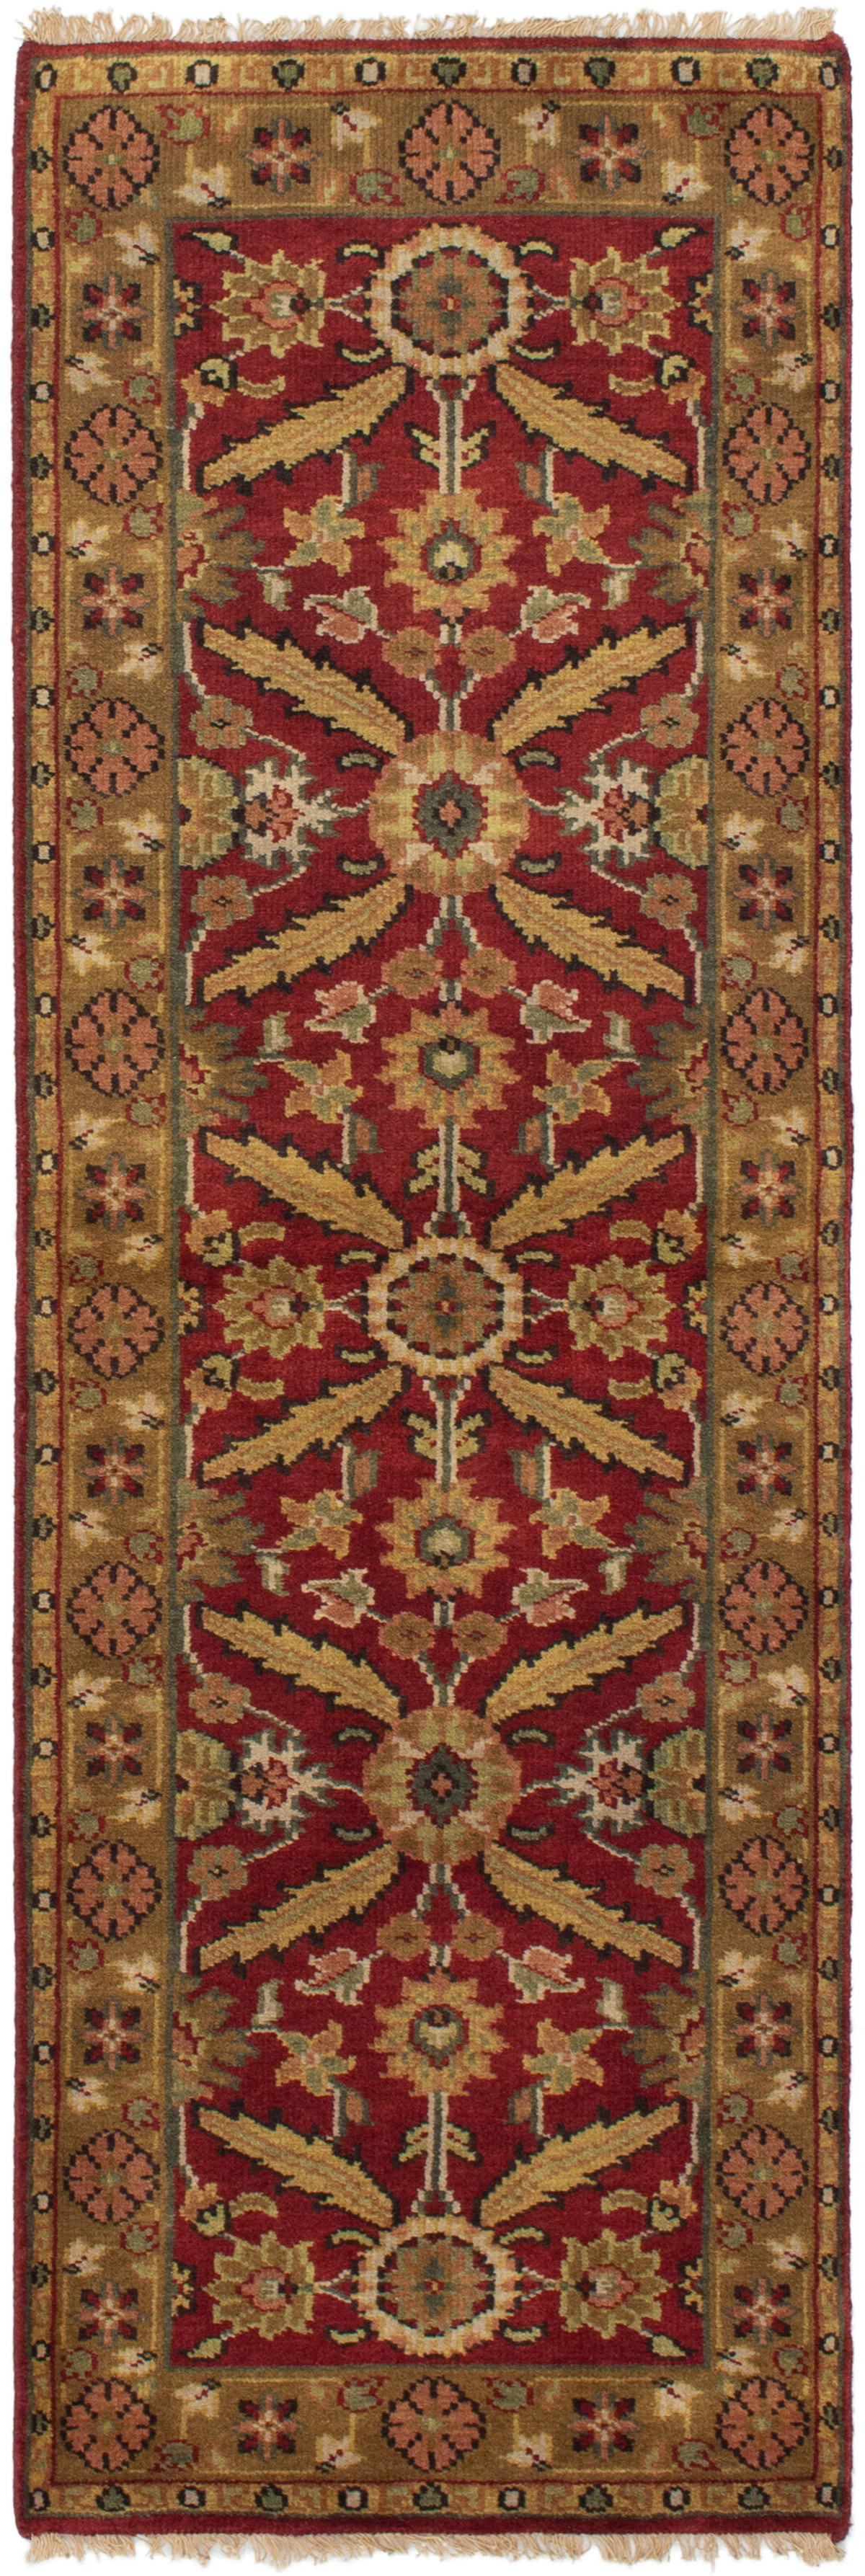 Hand-knotted Royal Mahal Red Wool Rug 2'6" x 8'3" Size: 2'6" x 8'3"  